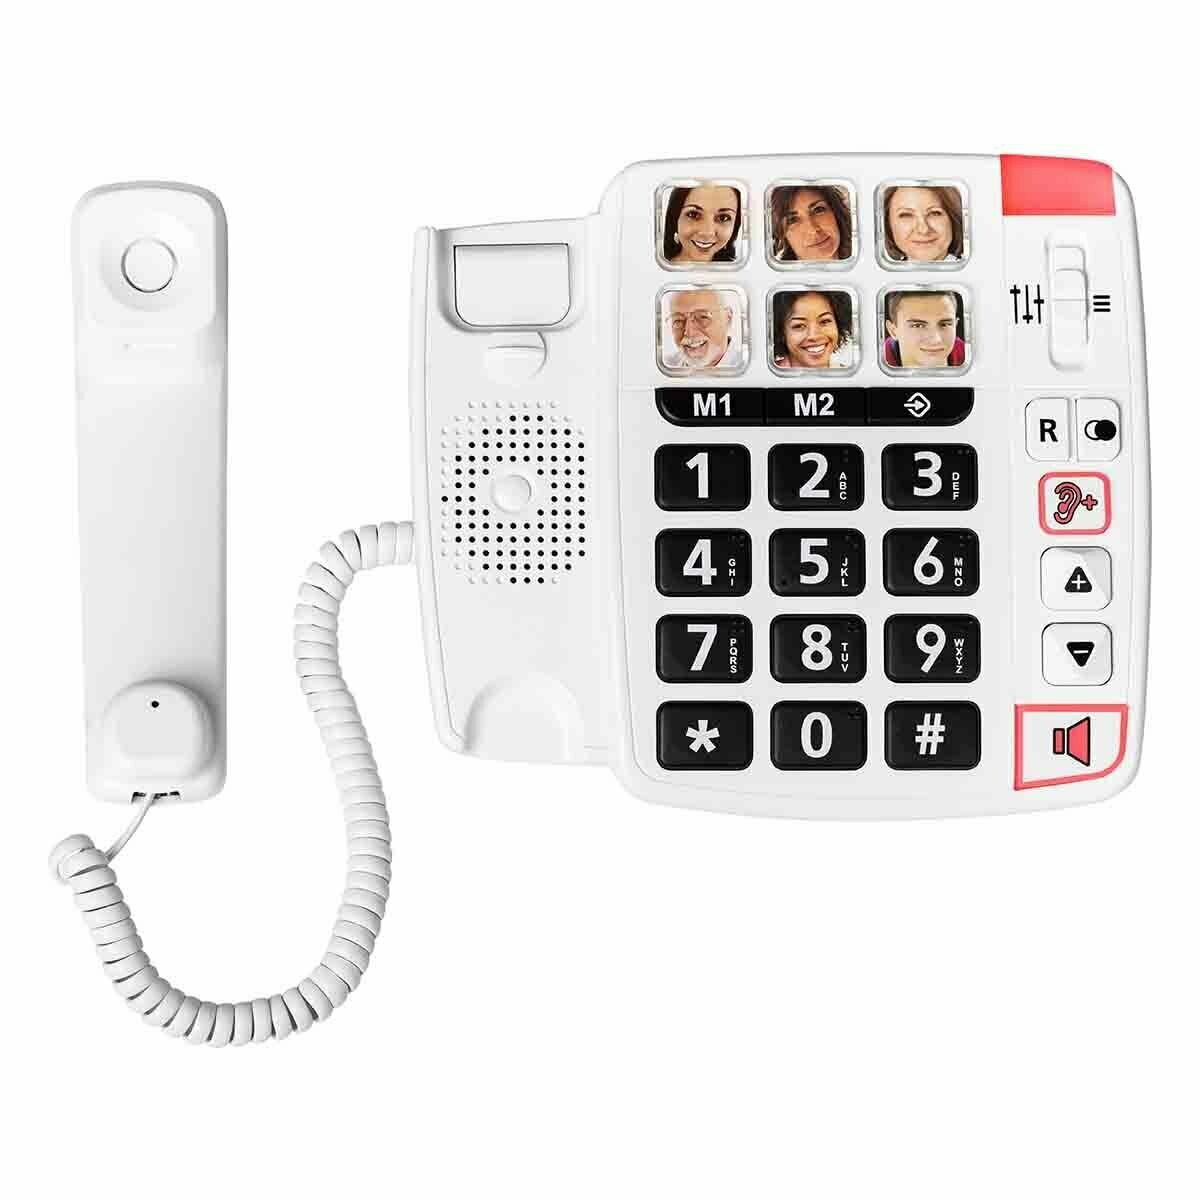 Extra Large Button Speakerphone, Telephones for Seniors. Elderly and those  w/ Limited Eyesight, Big Button Phone